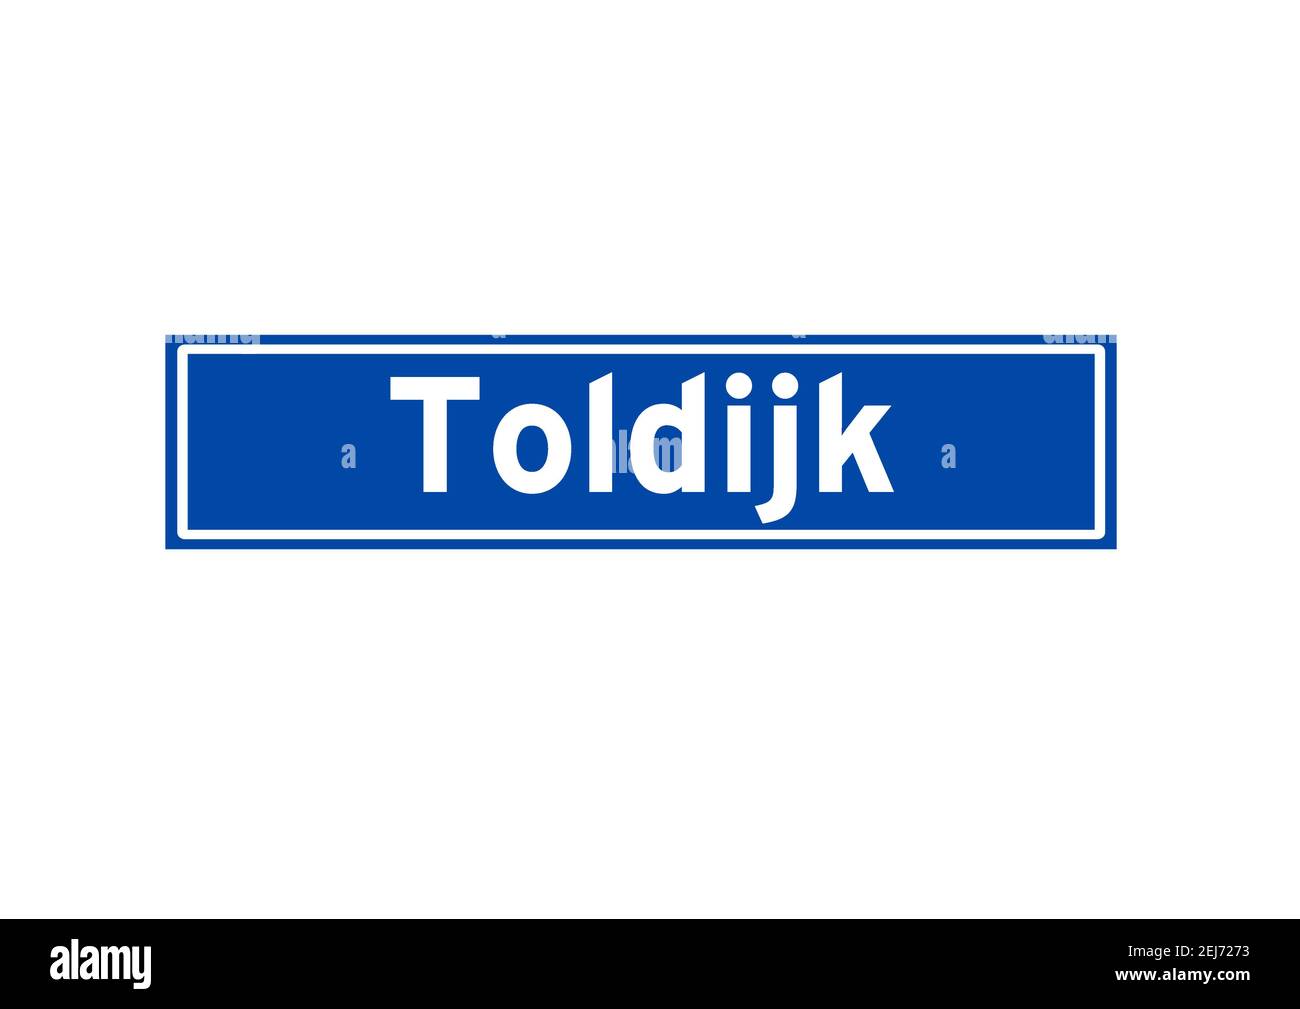 Toldijk isolated Dutch place name sign. City sign from the Netherlands. Stock Photo